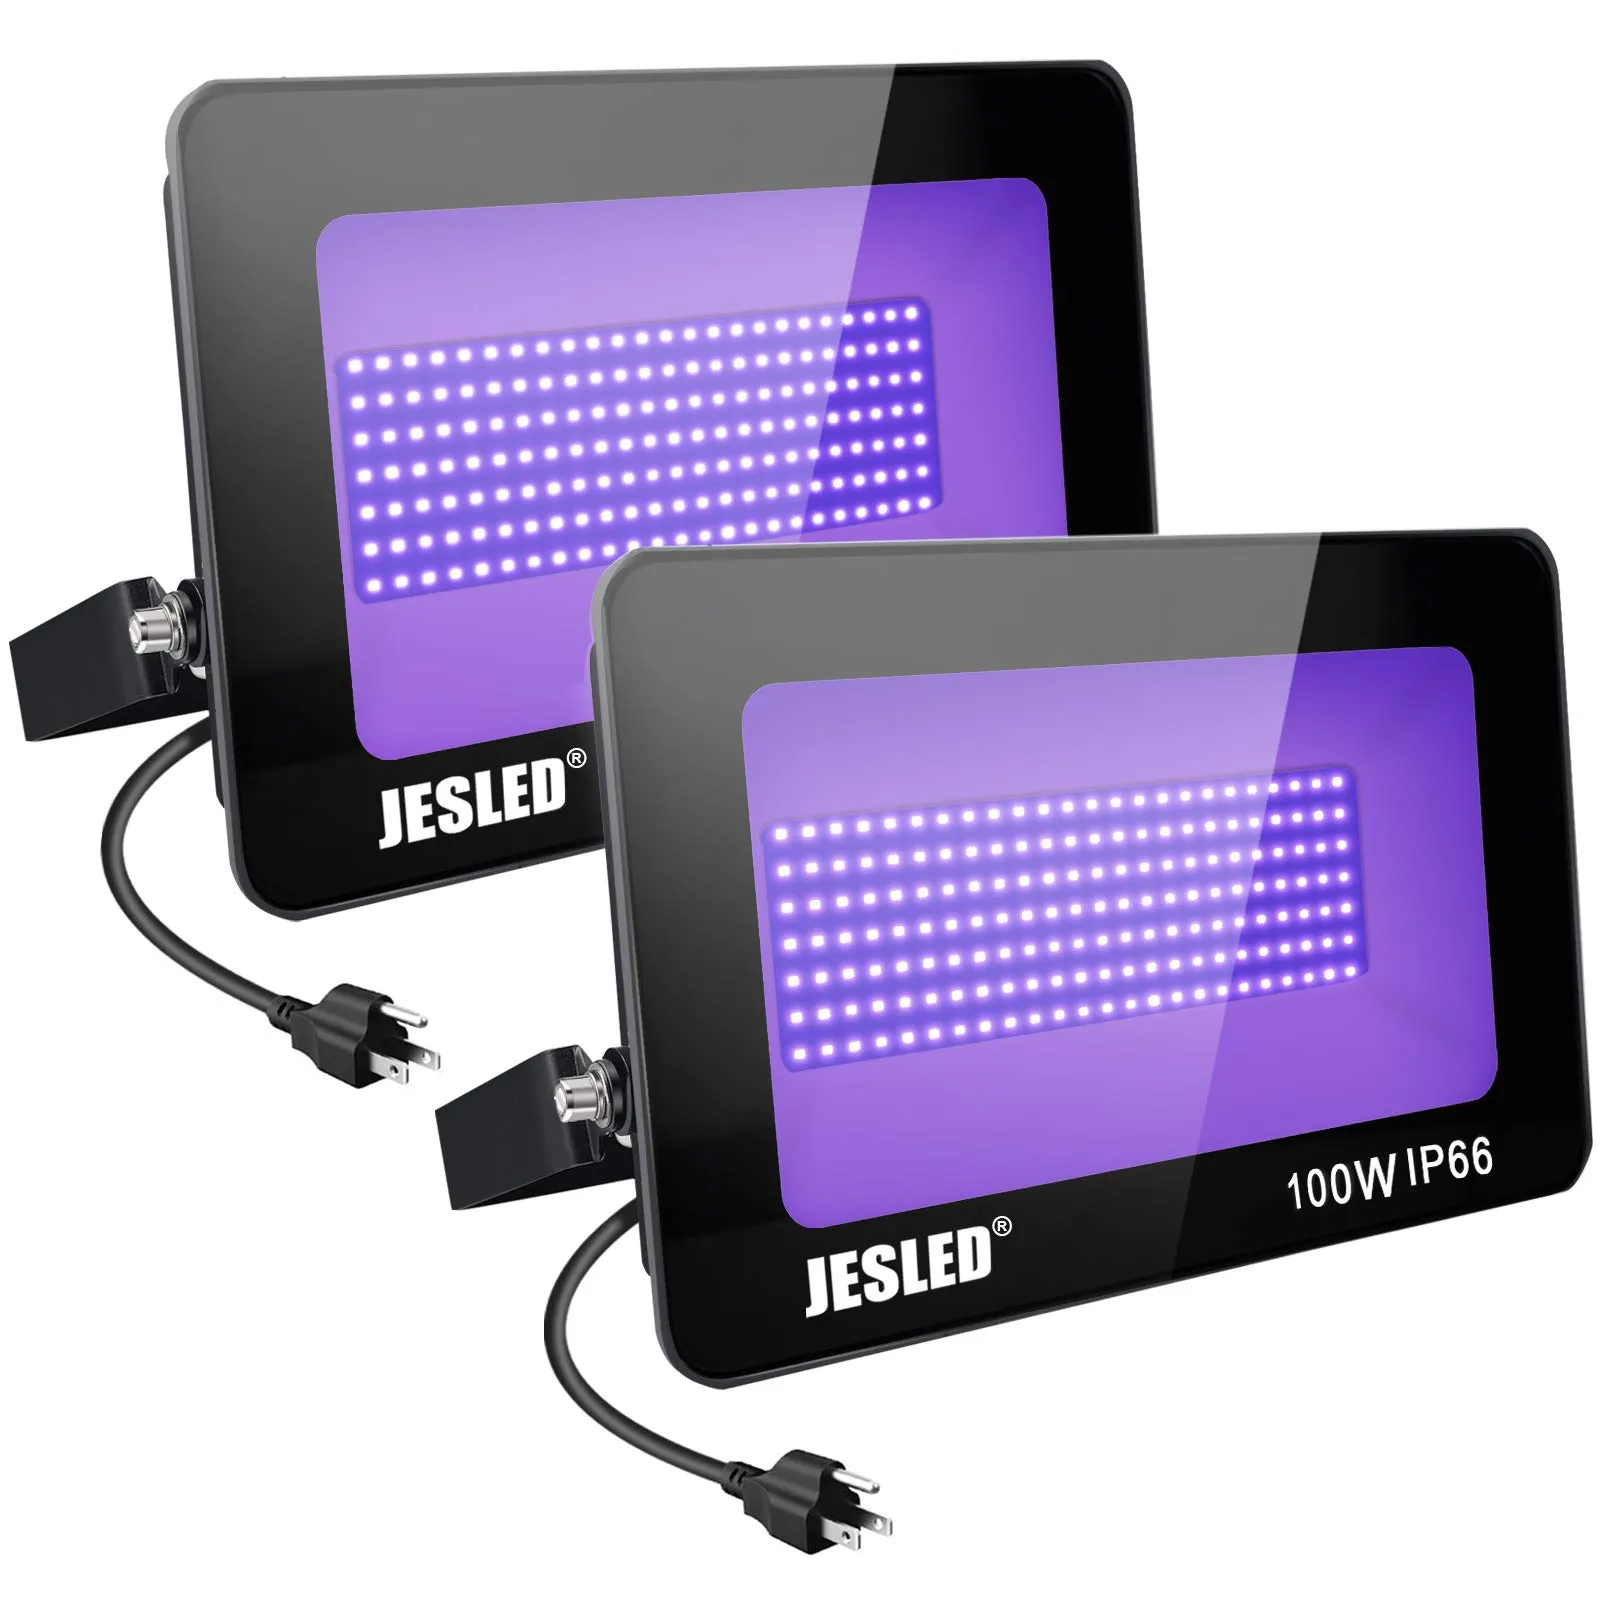 Jesled 100w LED Blacks Floodlight 2 Pack Blacklights For Glow Flood Lights With Plug IP66 Waterproof Stage Lighting Aquarium Body Paint Black Poster Room Party Party